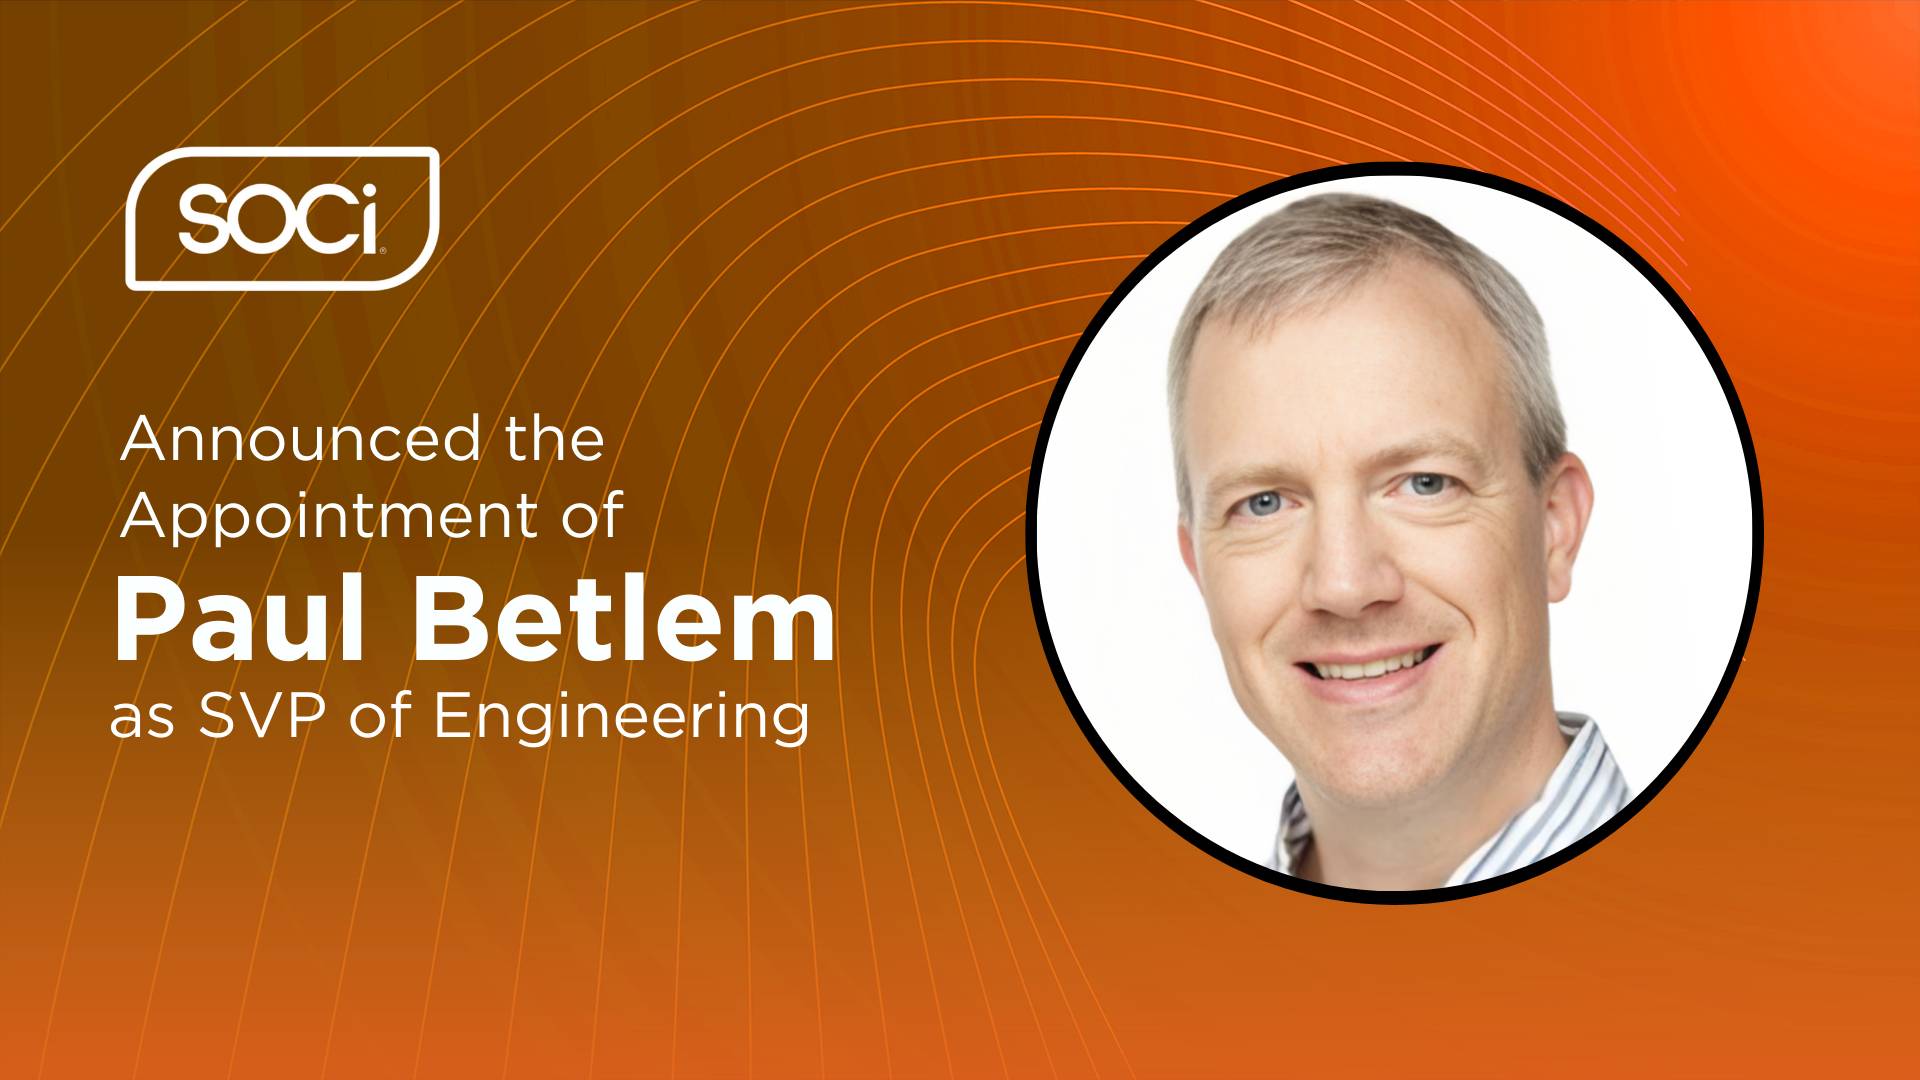 SOCi Welcomes Paul Betlem as Senior Vice President of Engineering, Bolstering AI and Data-Driven Innovation